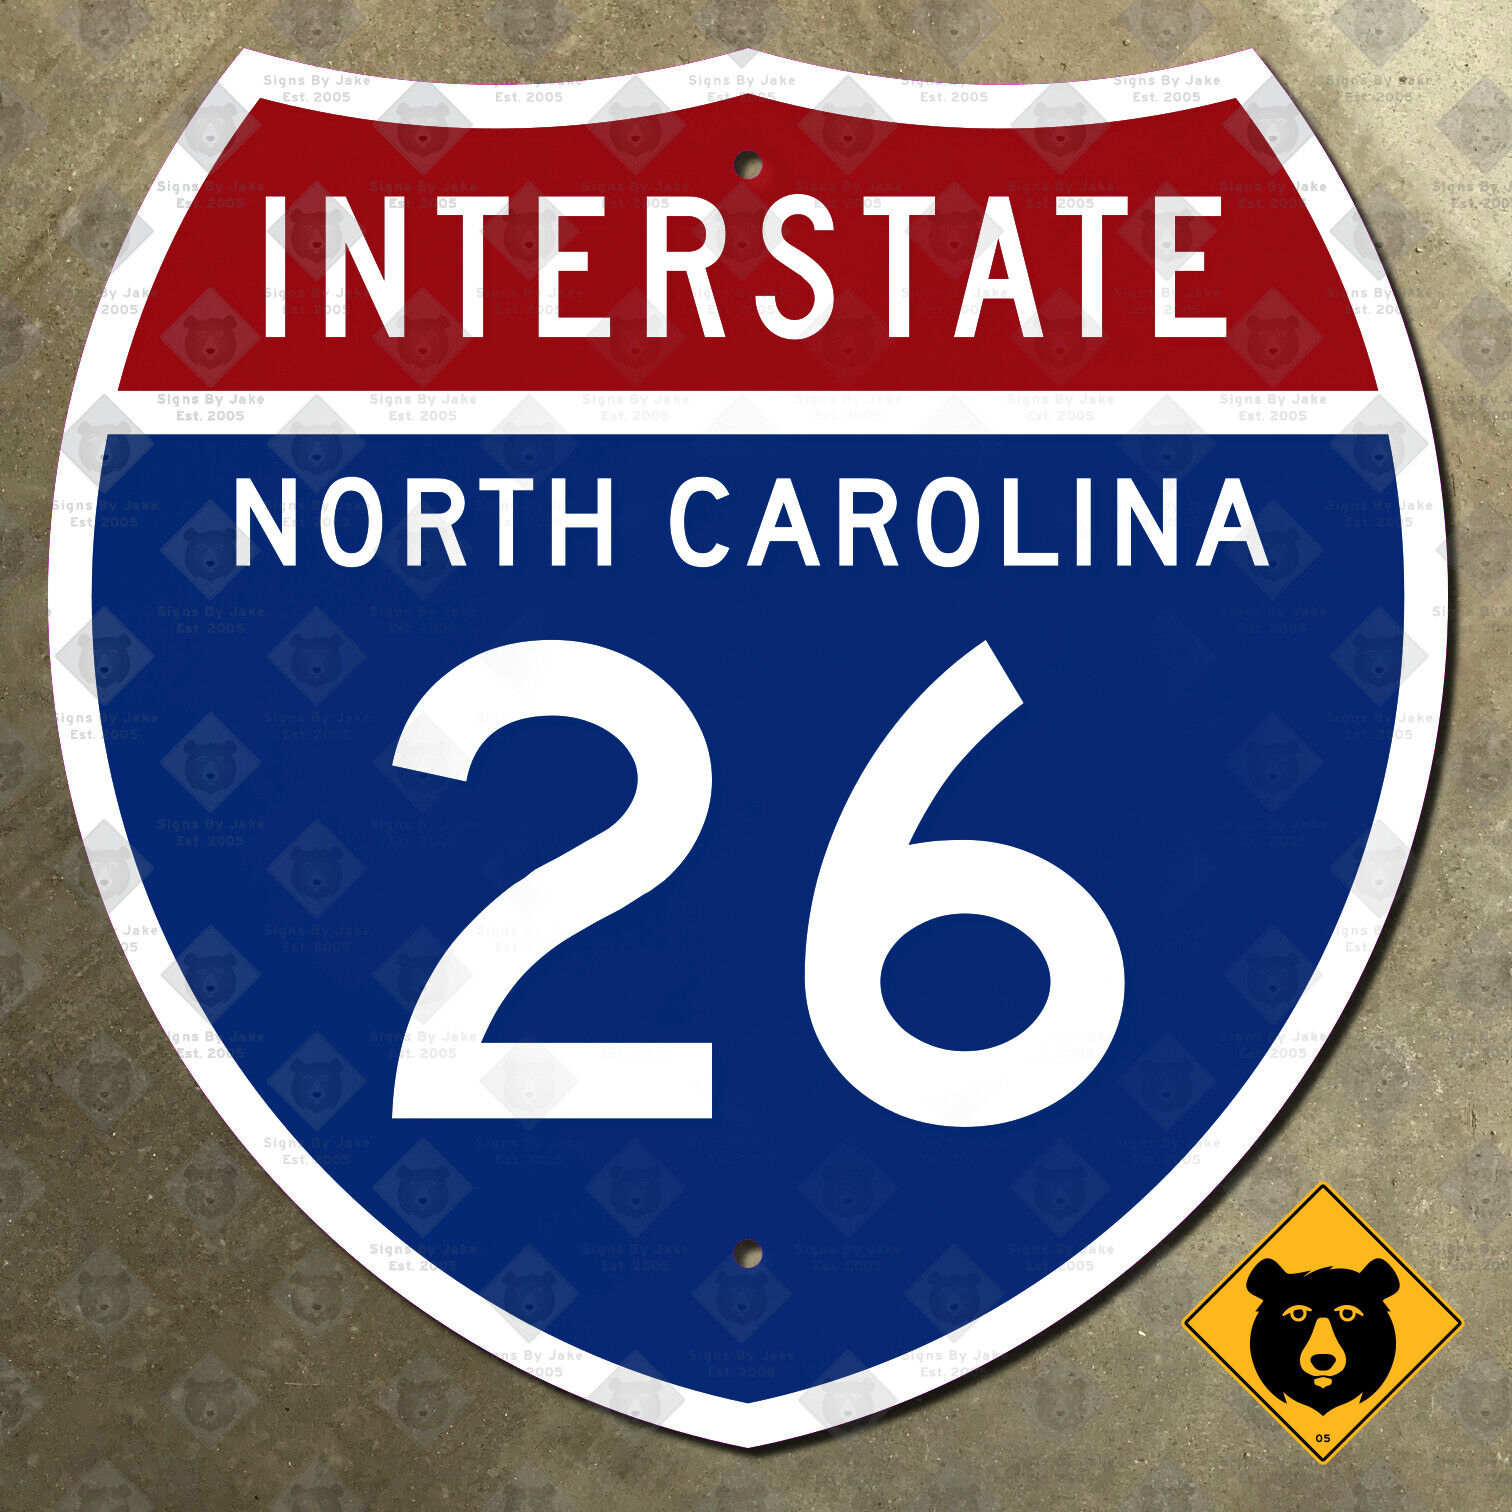 North Carolina Interstate 26 highway route sign shield 1957 Asheville 12x12